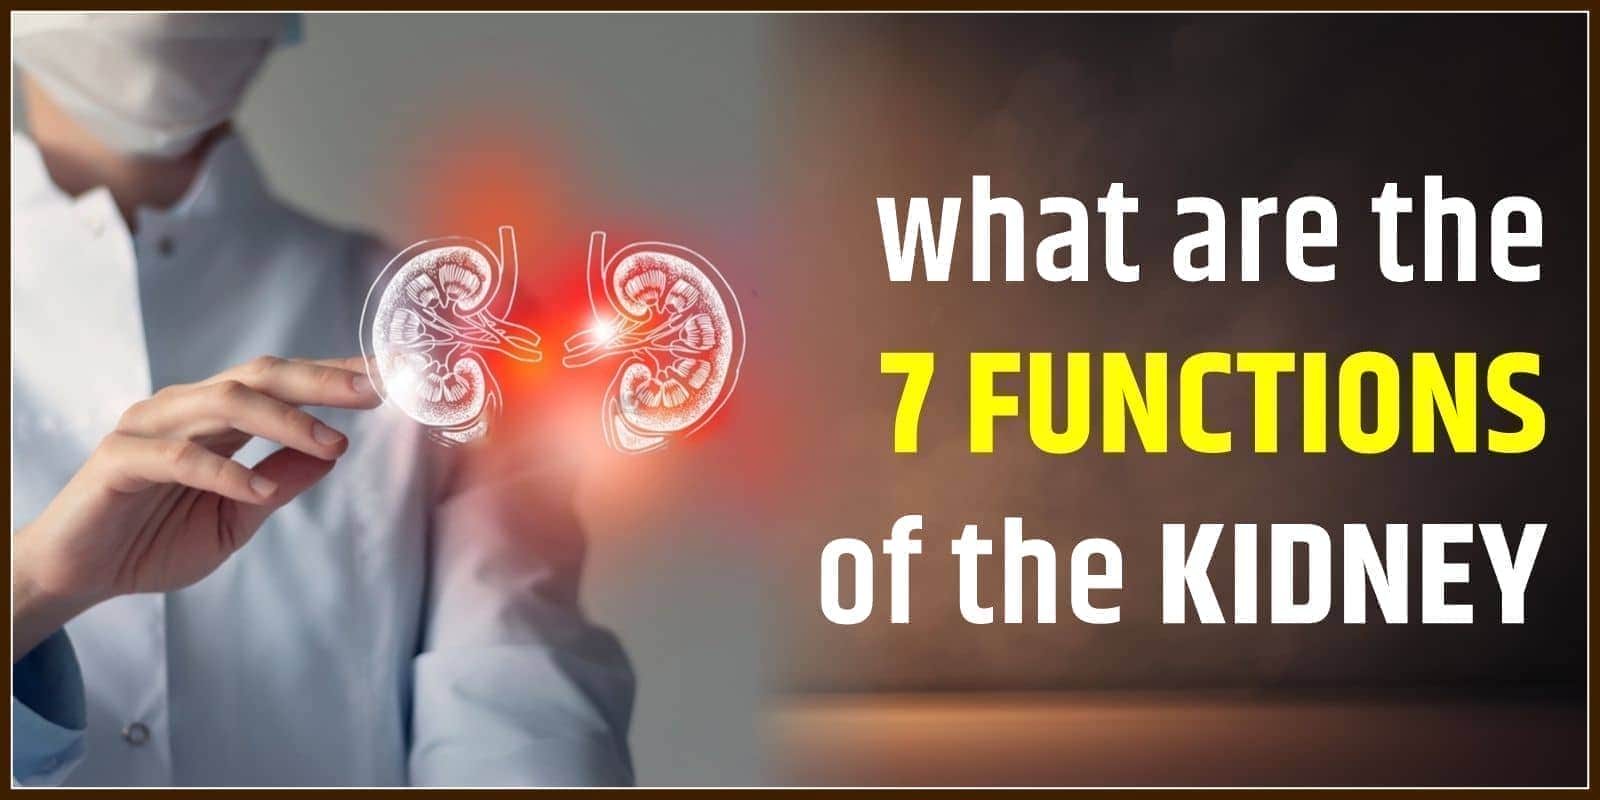 What Are The 7 Functions Of The Kidney